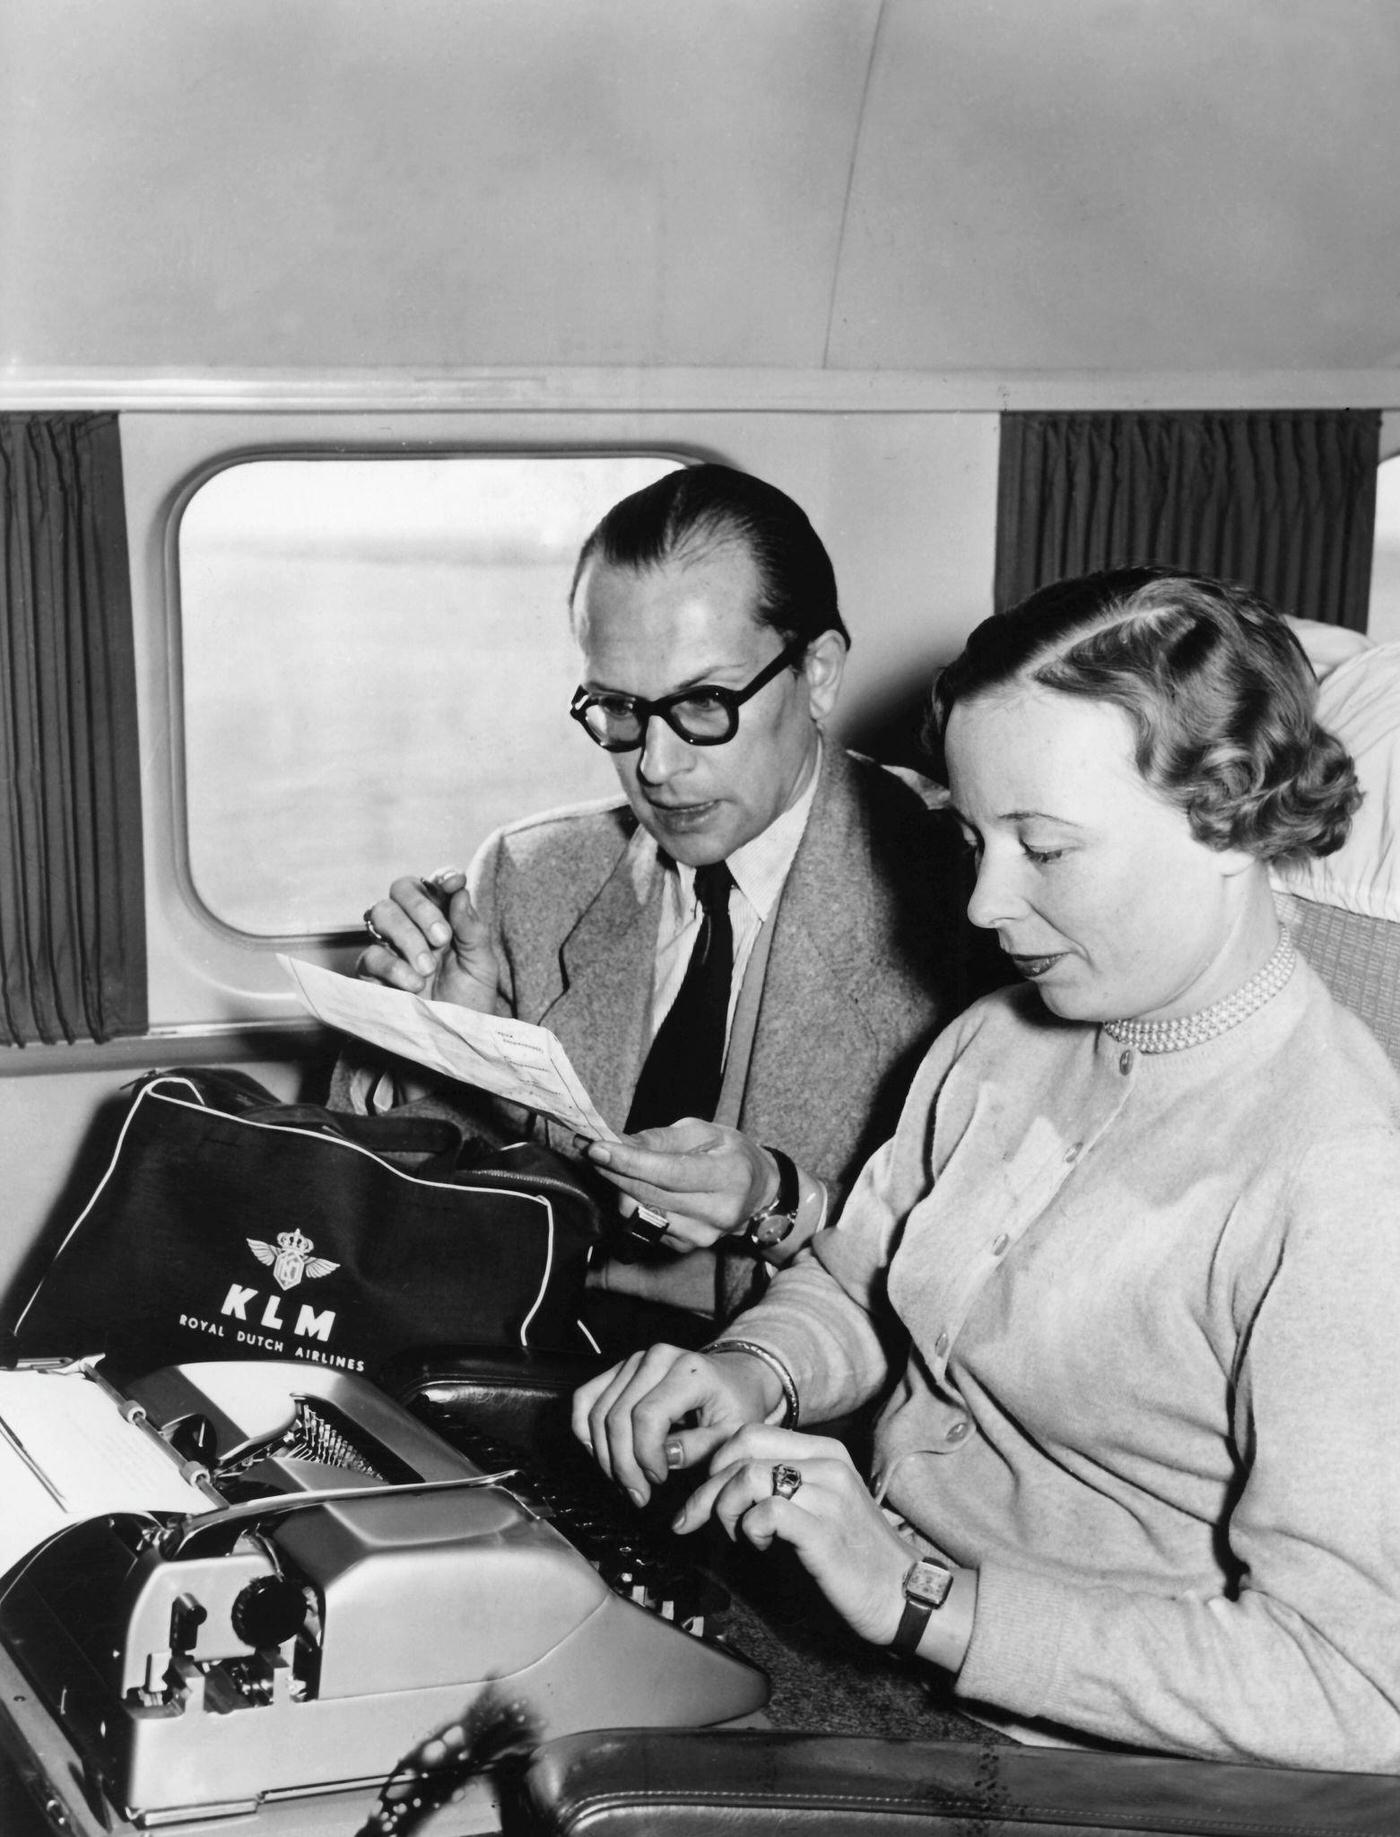 A secretary from KLM is captured doing dictation on board a KLM passenger plane at Frankfurt Airport in January 1955.